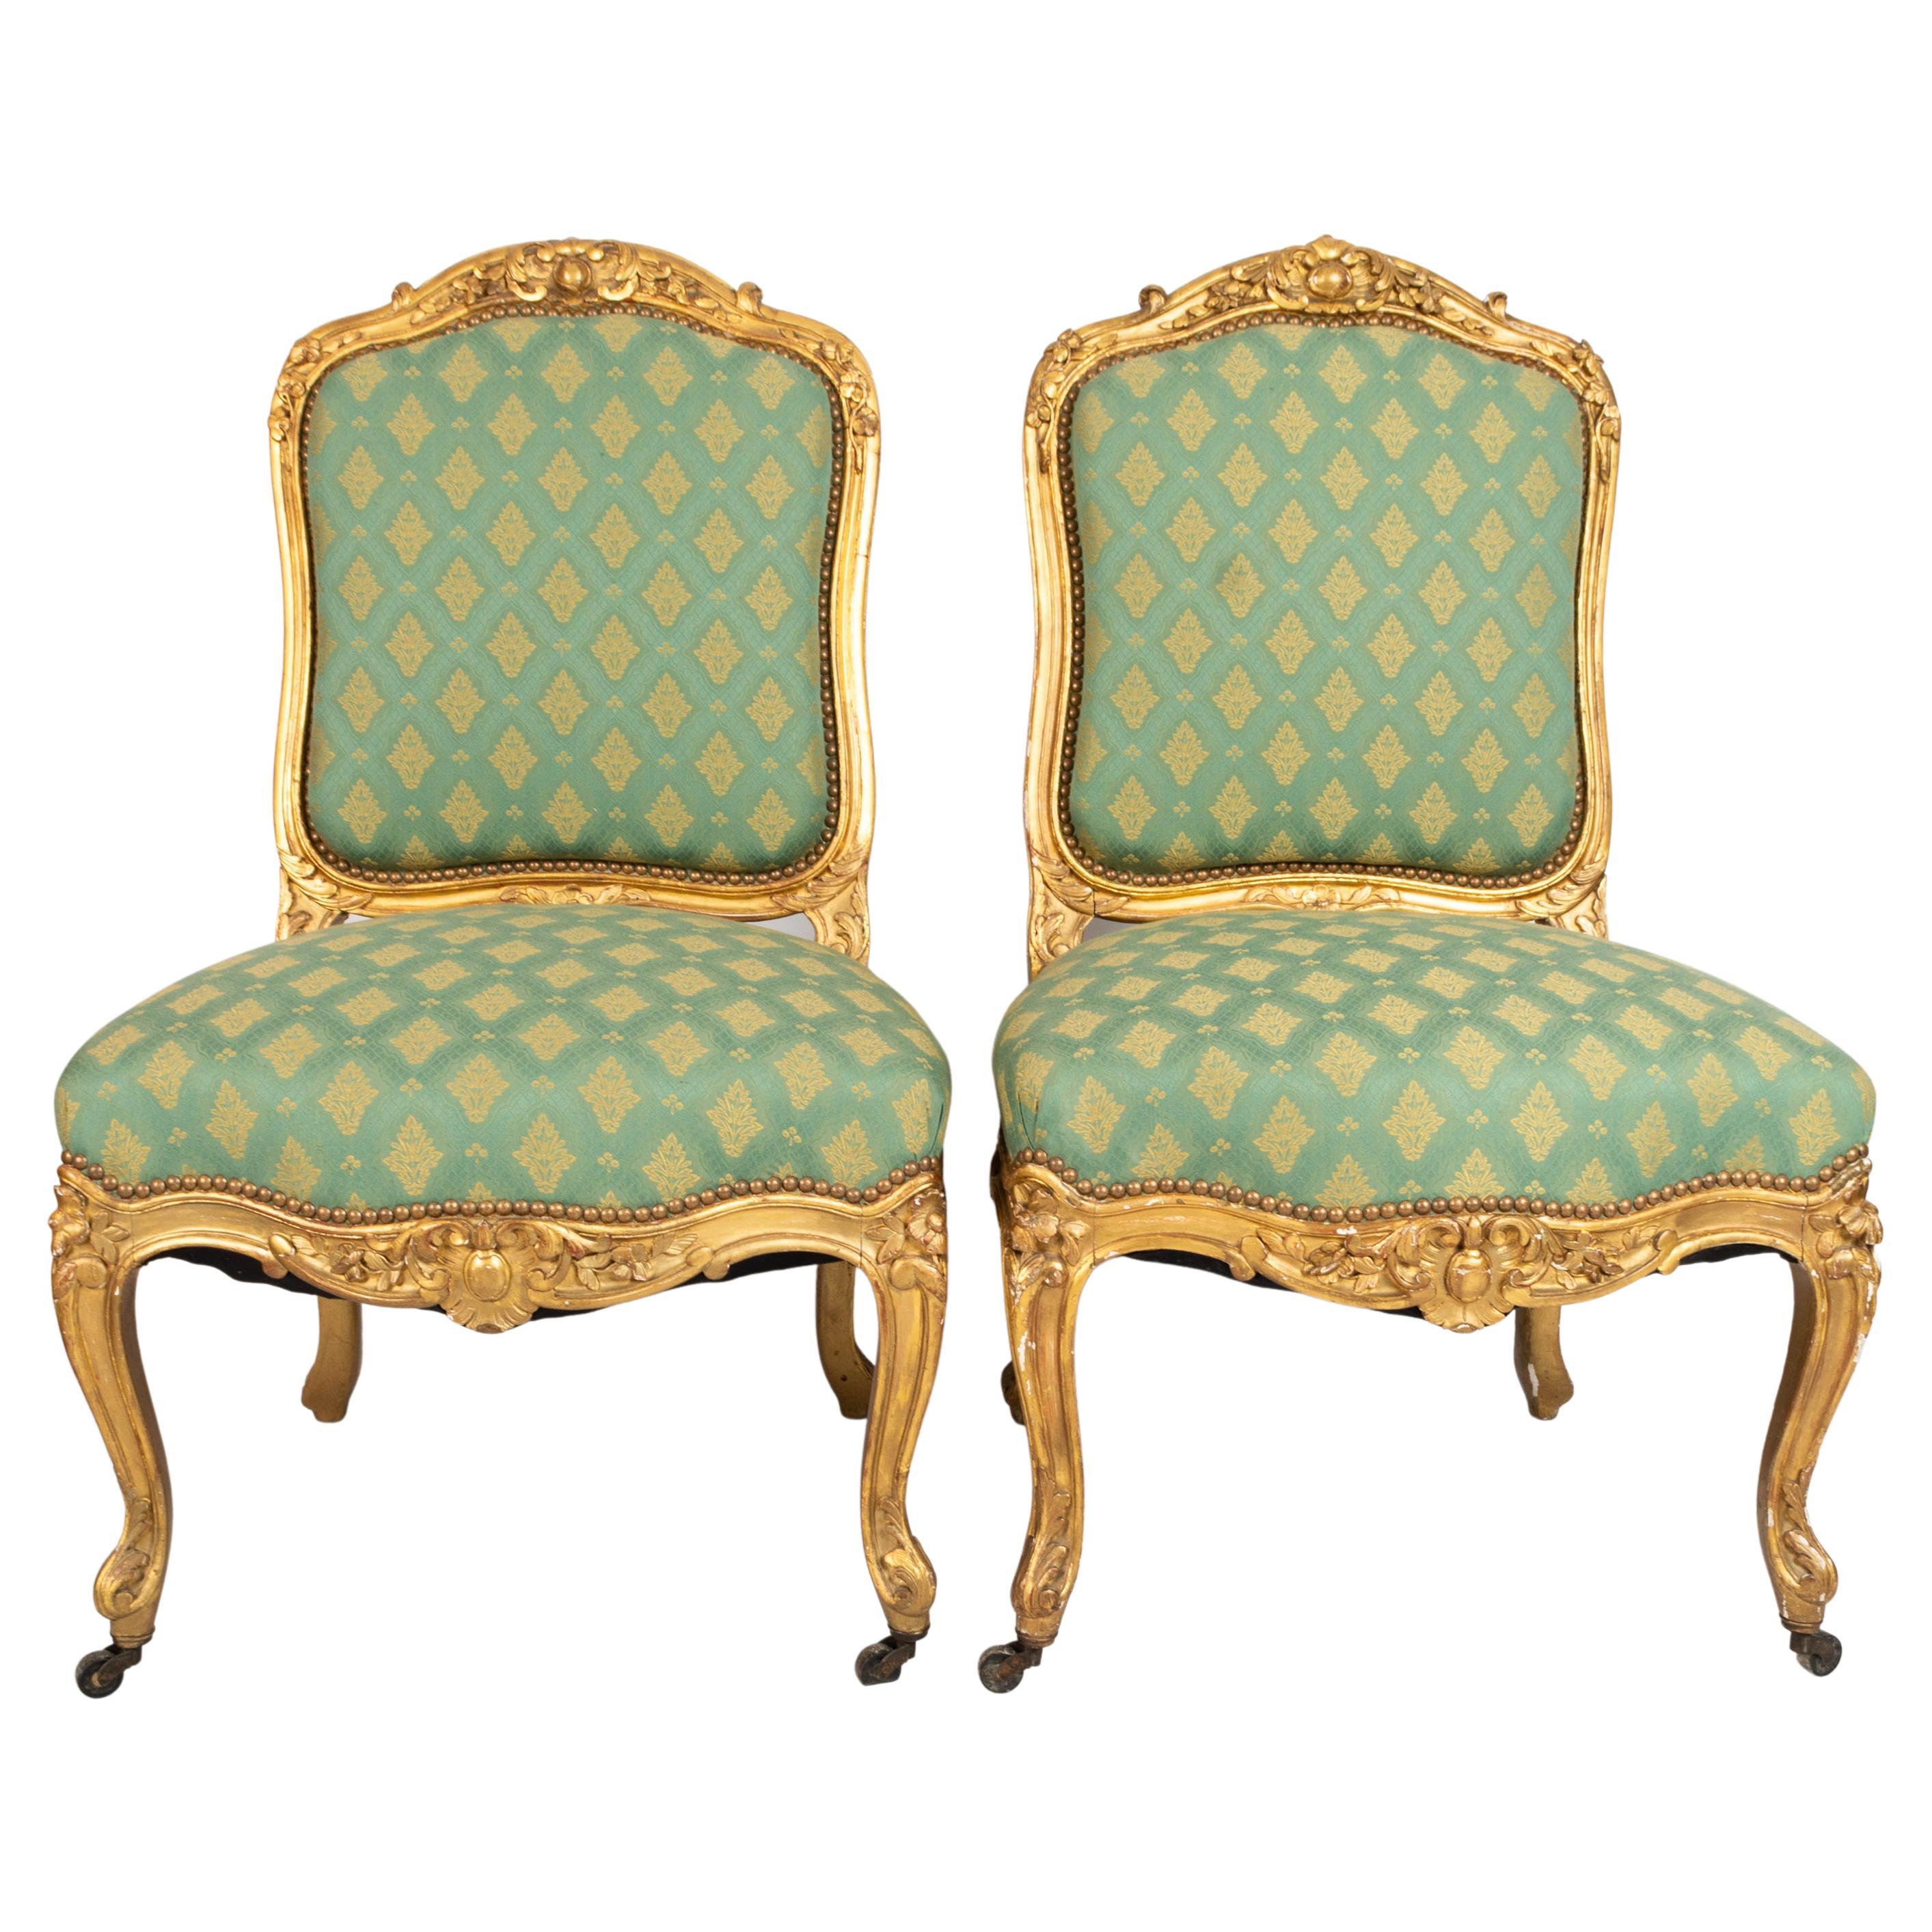 Pair Antique French 19th Century Louis XV Style Giltwood Salon Chairs C.1870 For Sale